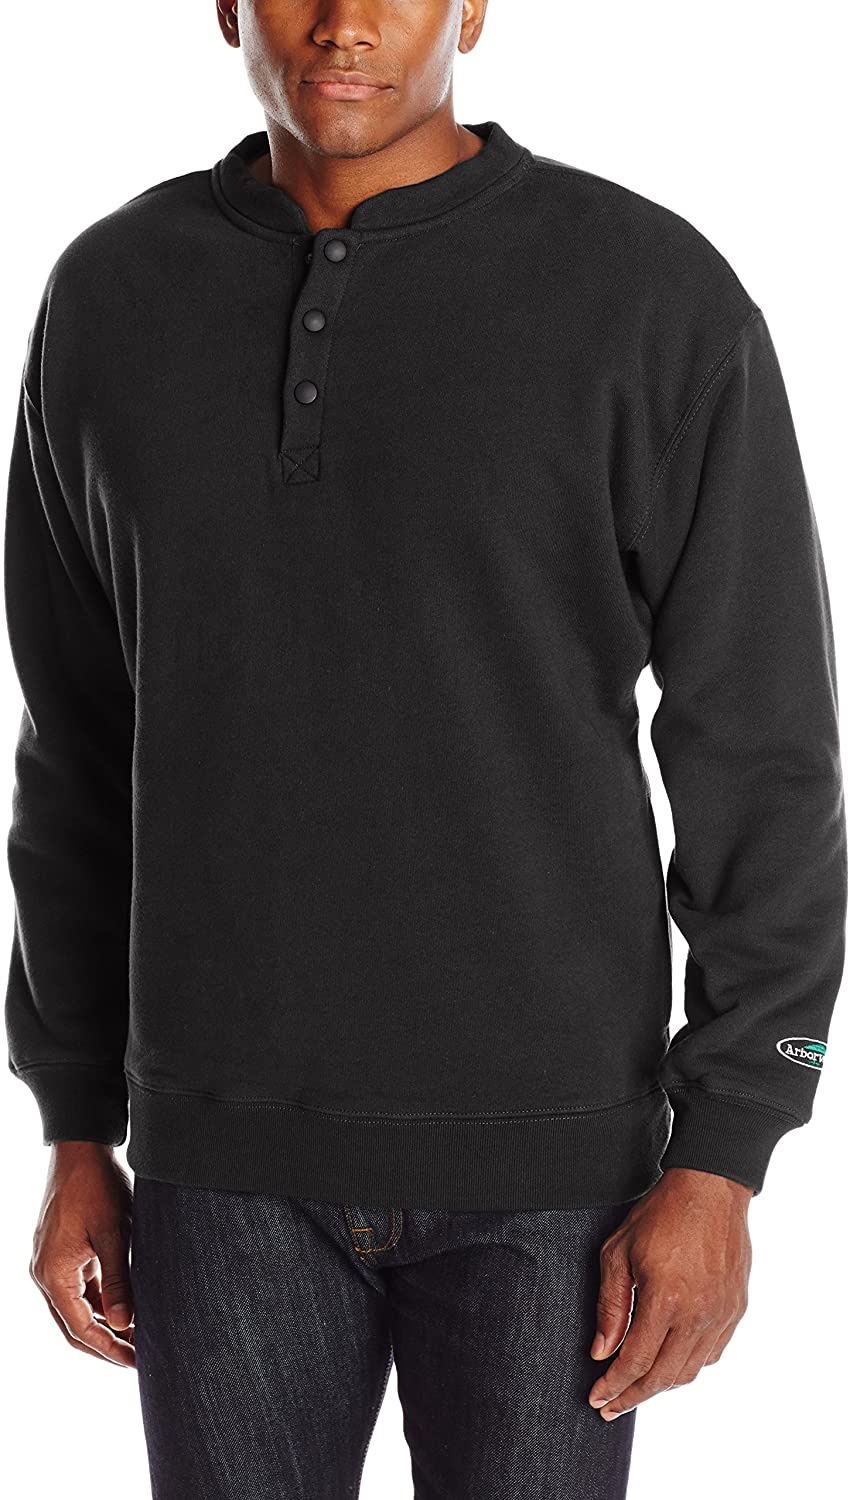 Arborwear Men's Double Thick Crew Sweatshirt in Black from the from